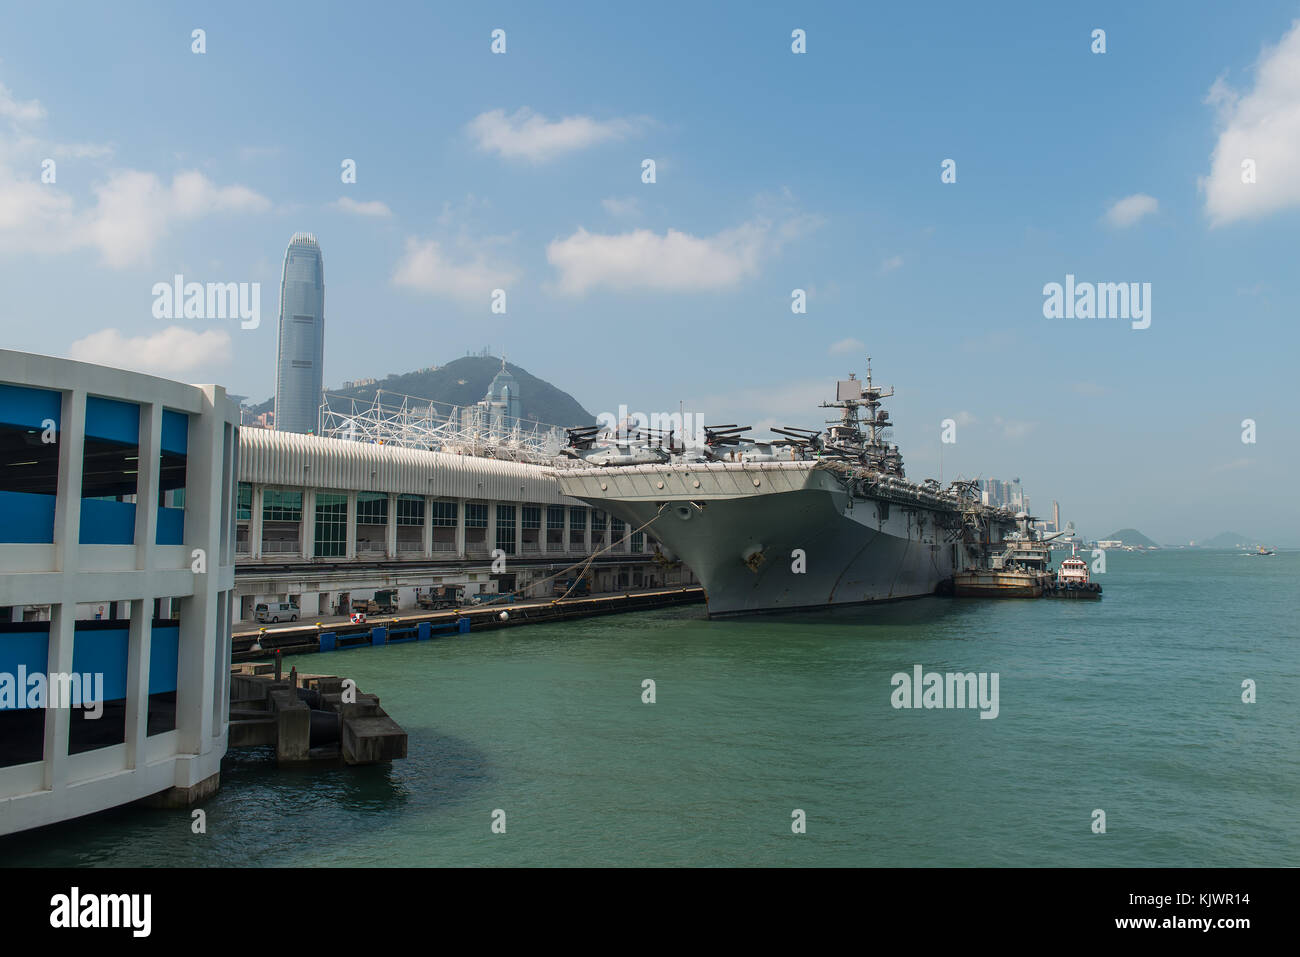 HONG KONG, CHINA - Sept 18:The U.S. amphibious assault ship USS Bonhomme Richard pulled in Hong Kong waters on Sept 18,2013 to get replenishment.Commi Stock Photo